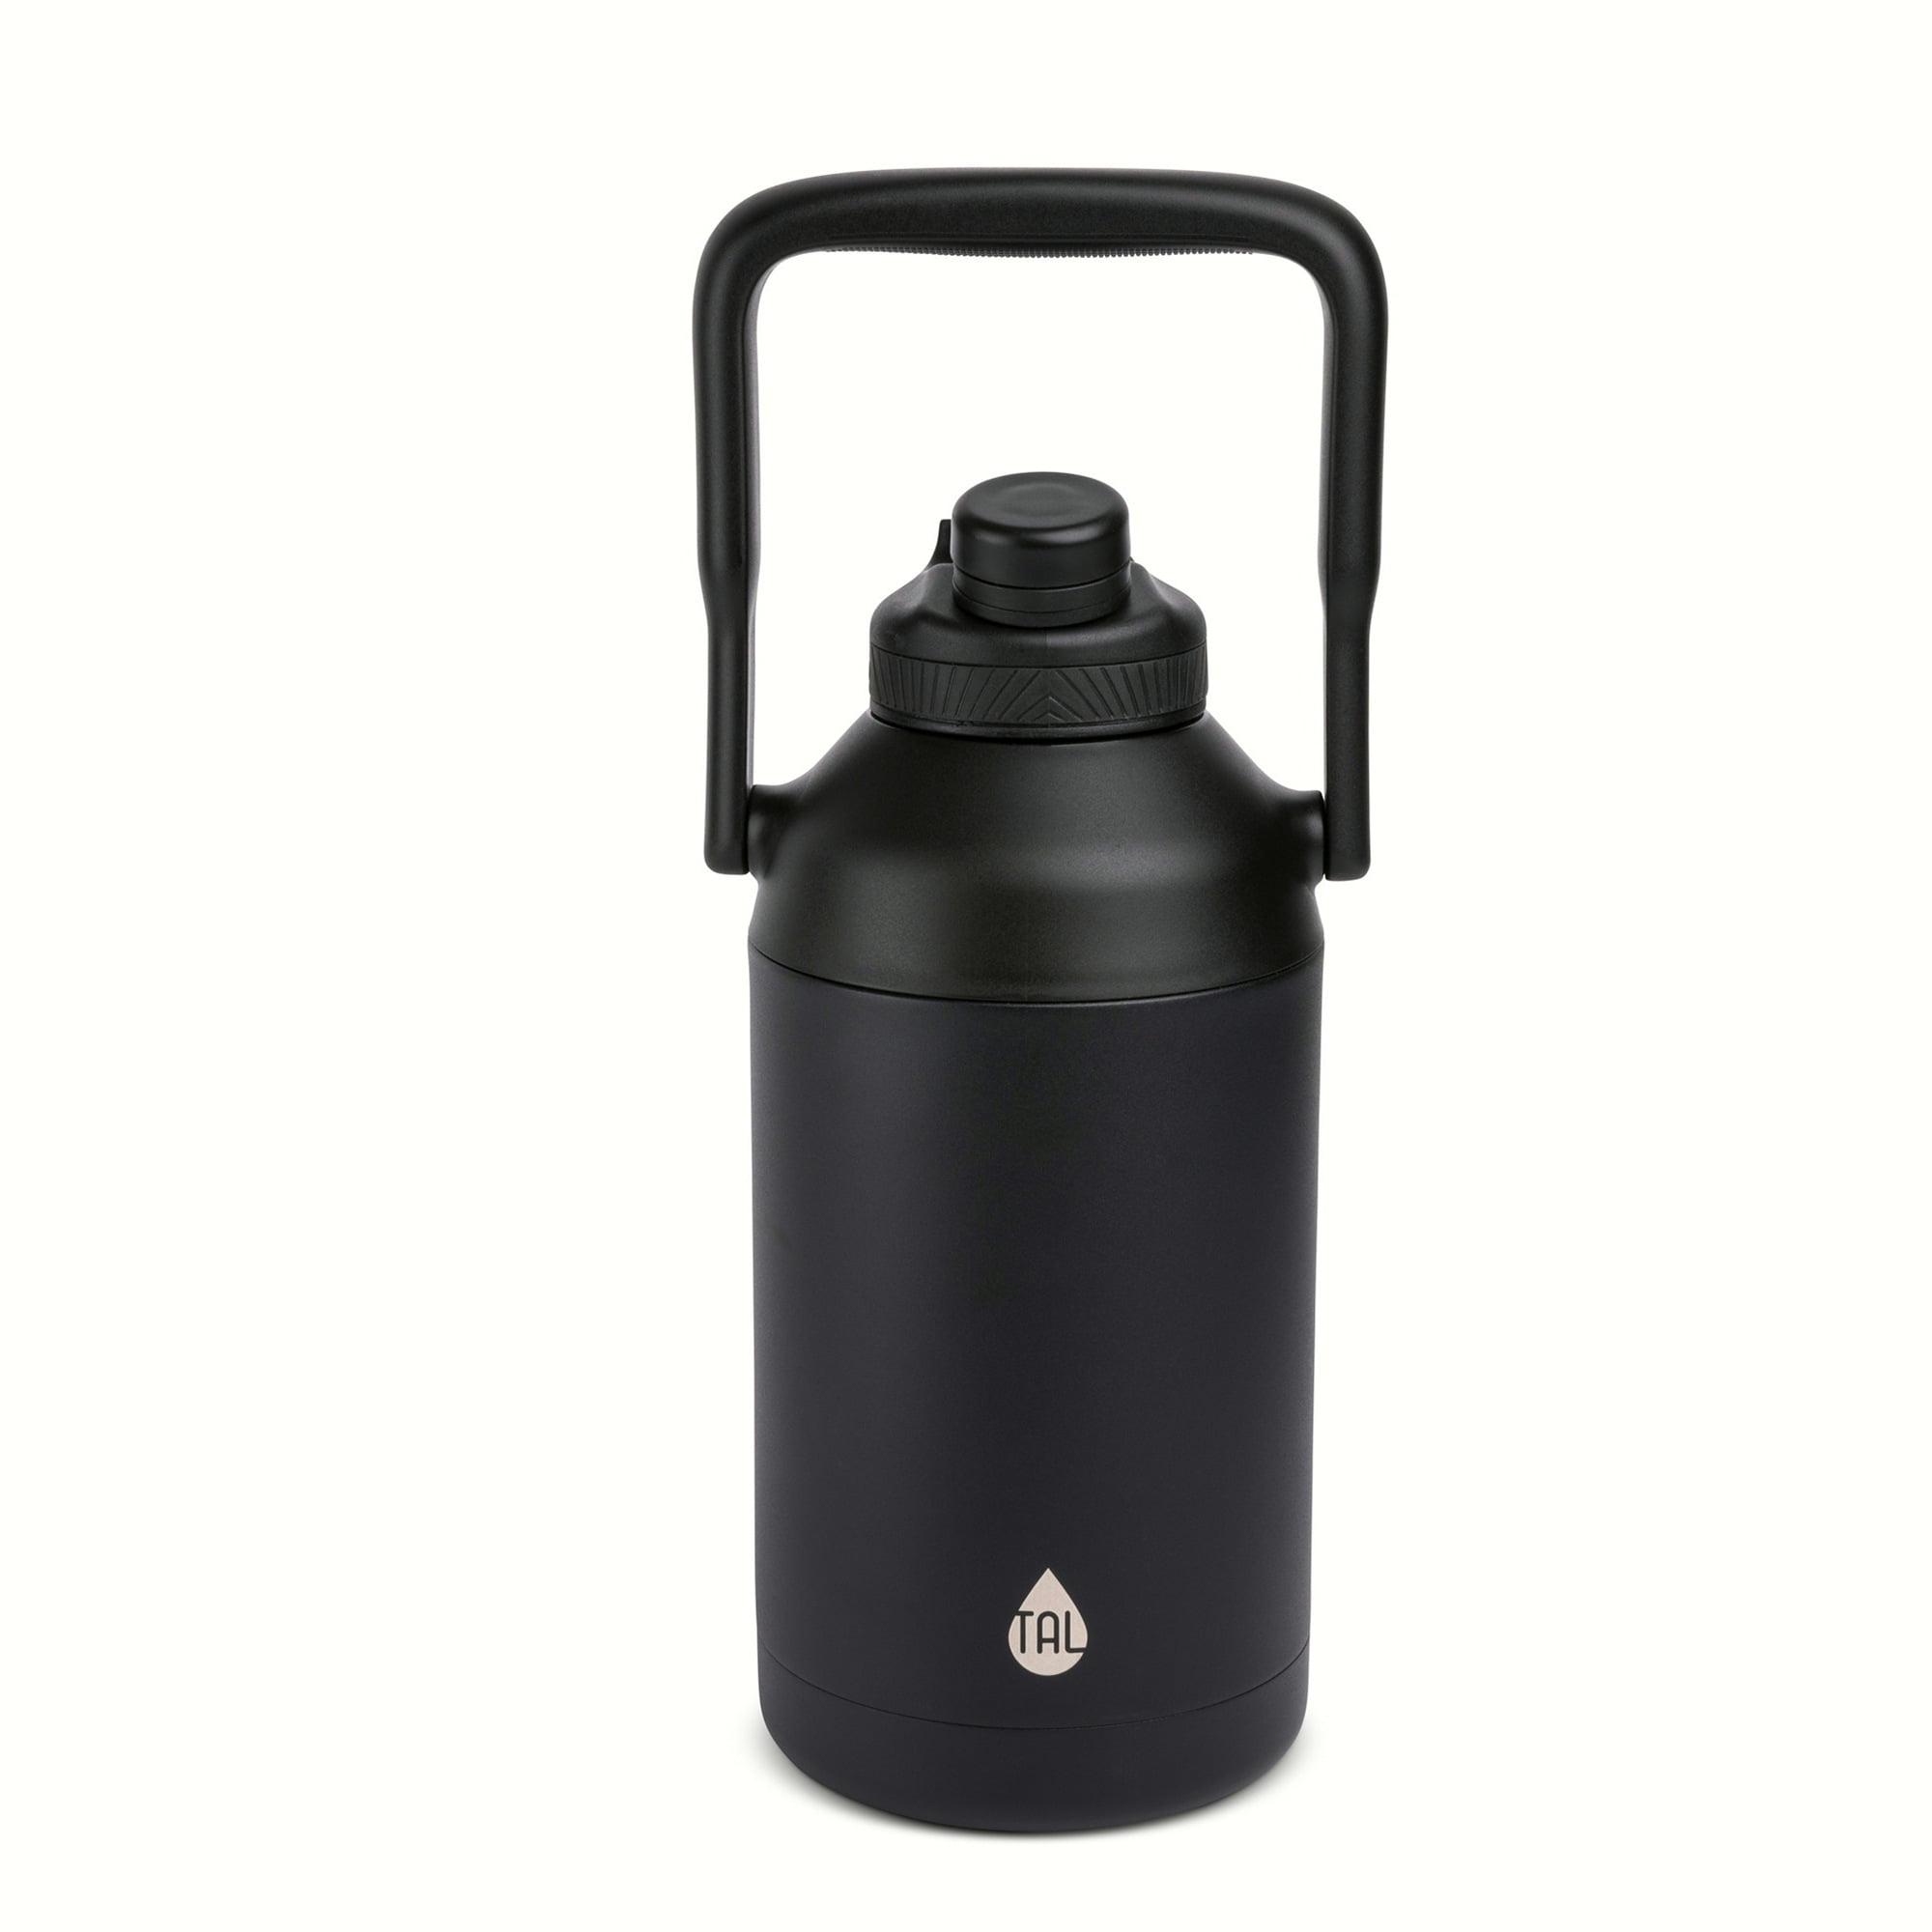 38 oz. Stainless Steel Insulated Thermal Bottle with Lid in Dark Gold  985116314M - The Home Depot